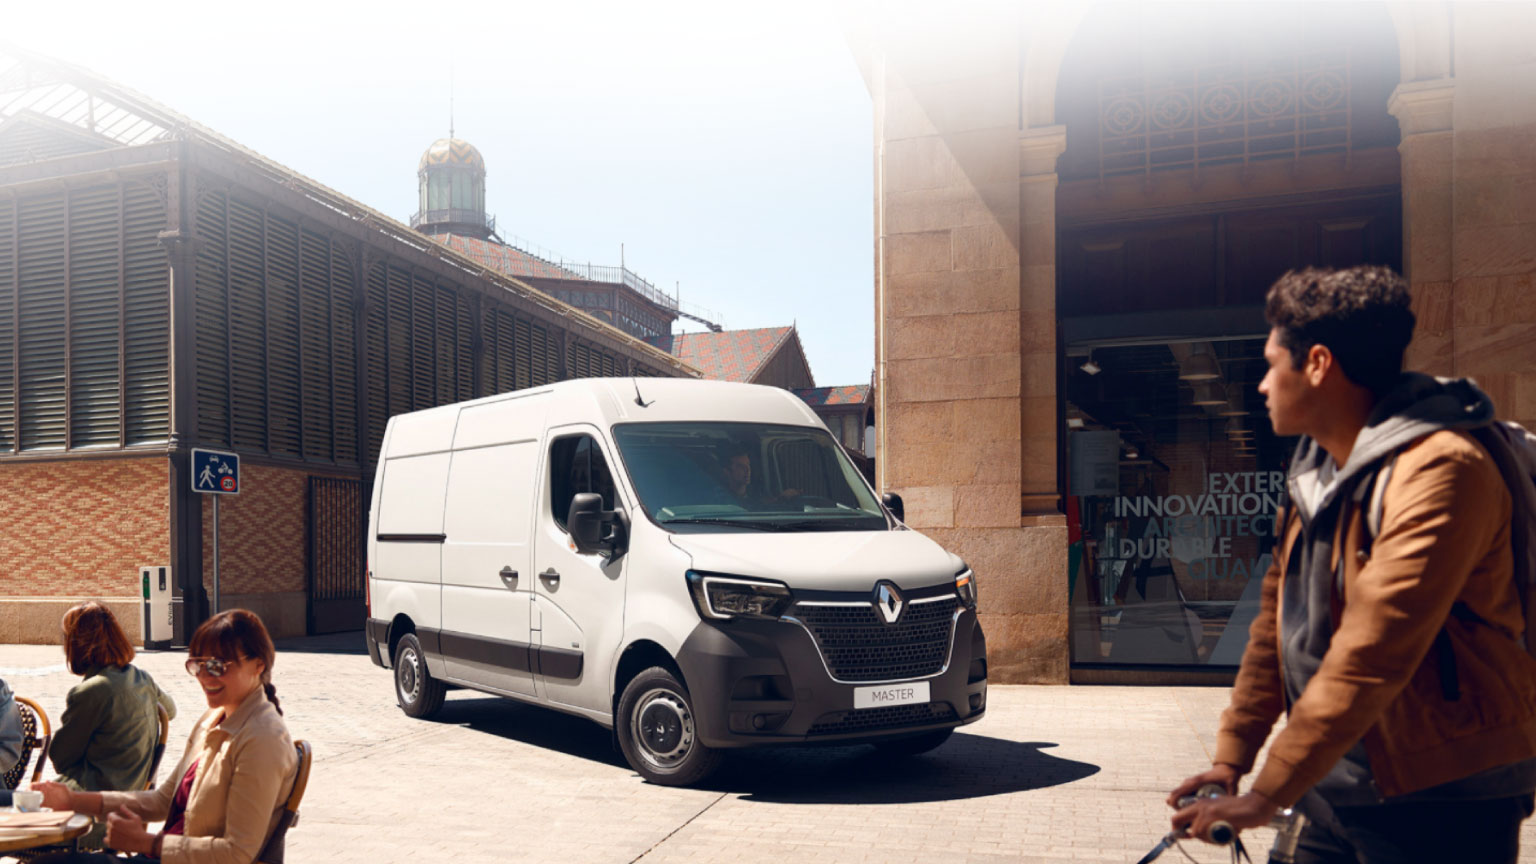 Arabian Automobiles launches the NEW 2021 RENAULT MASTER: a fleet vehicular innovation